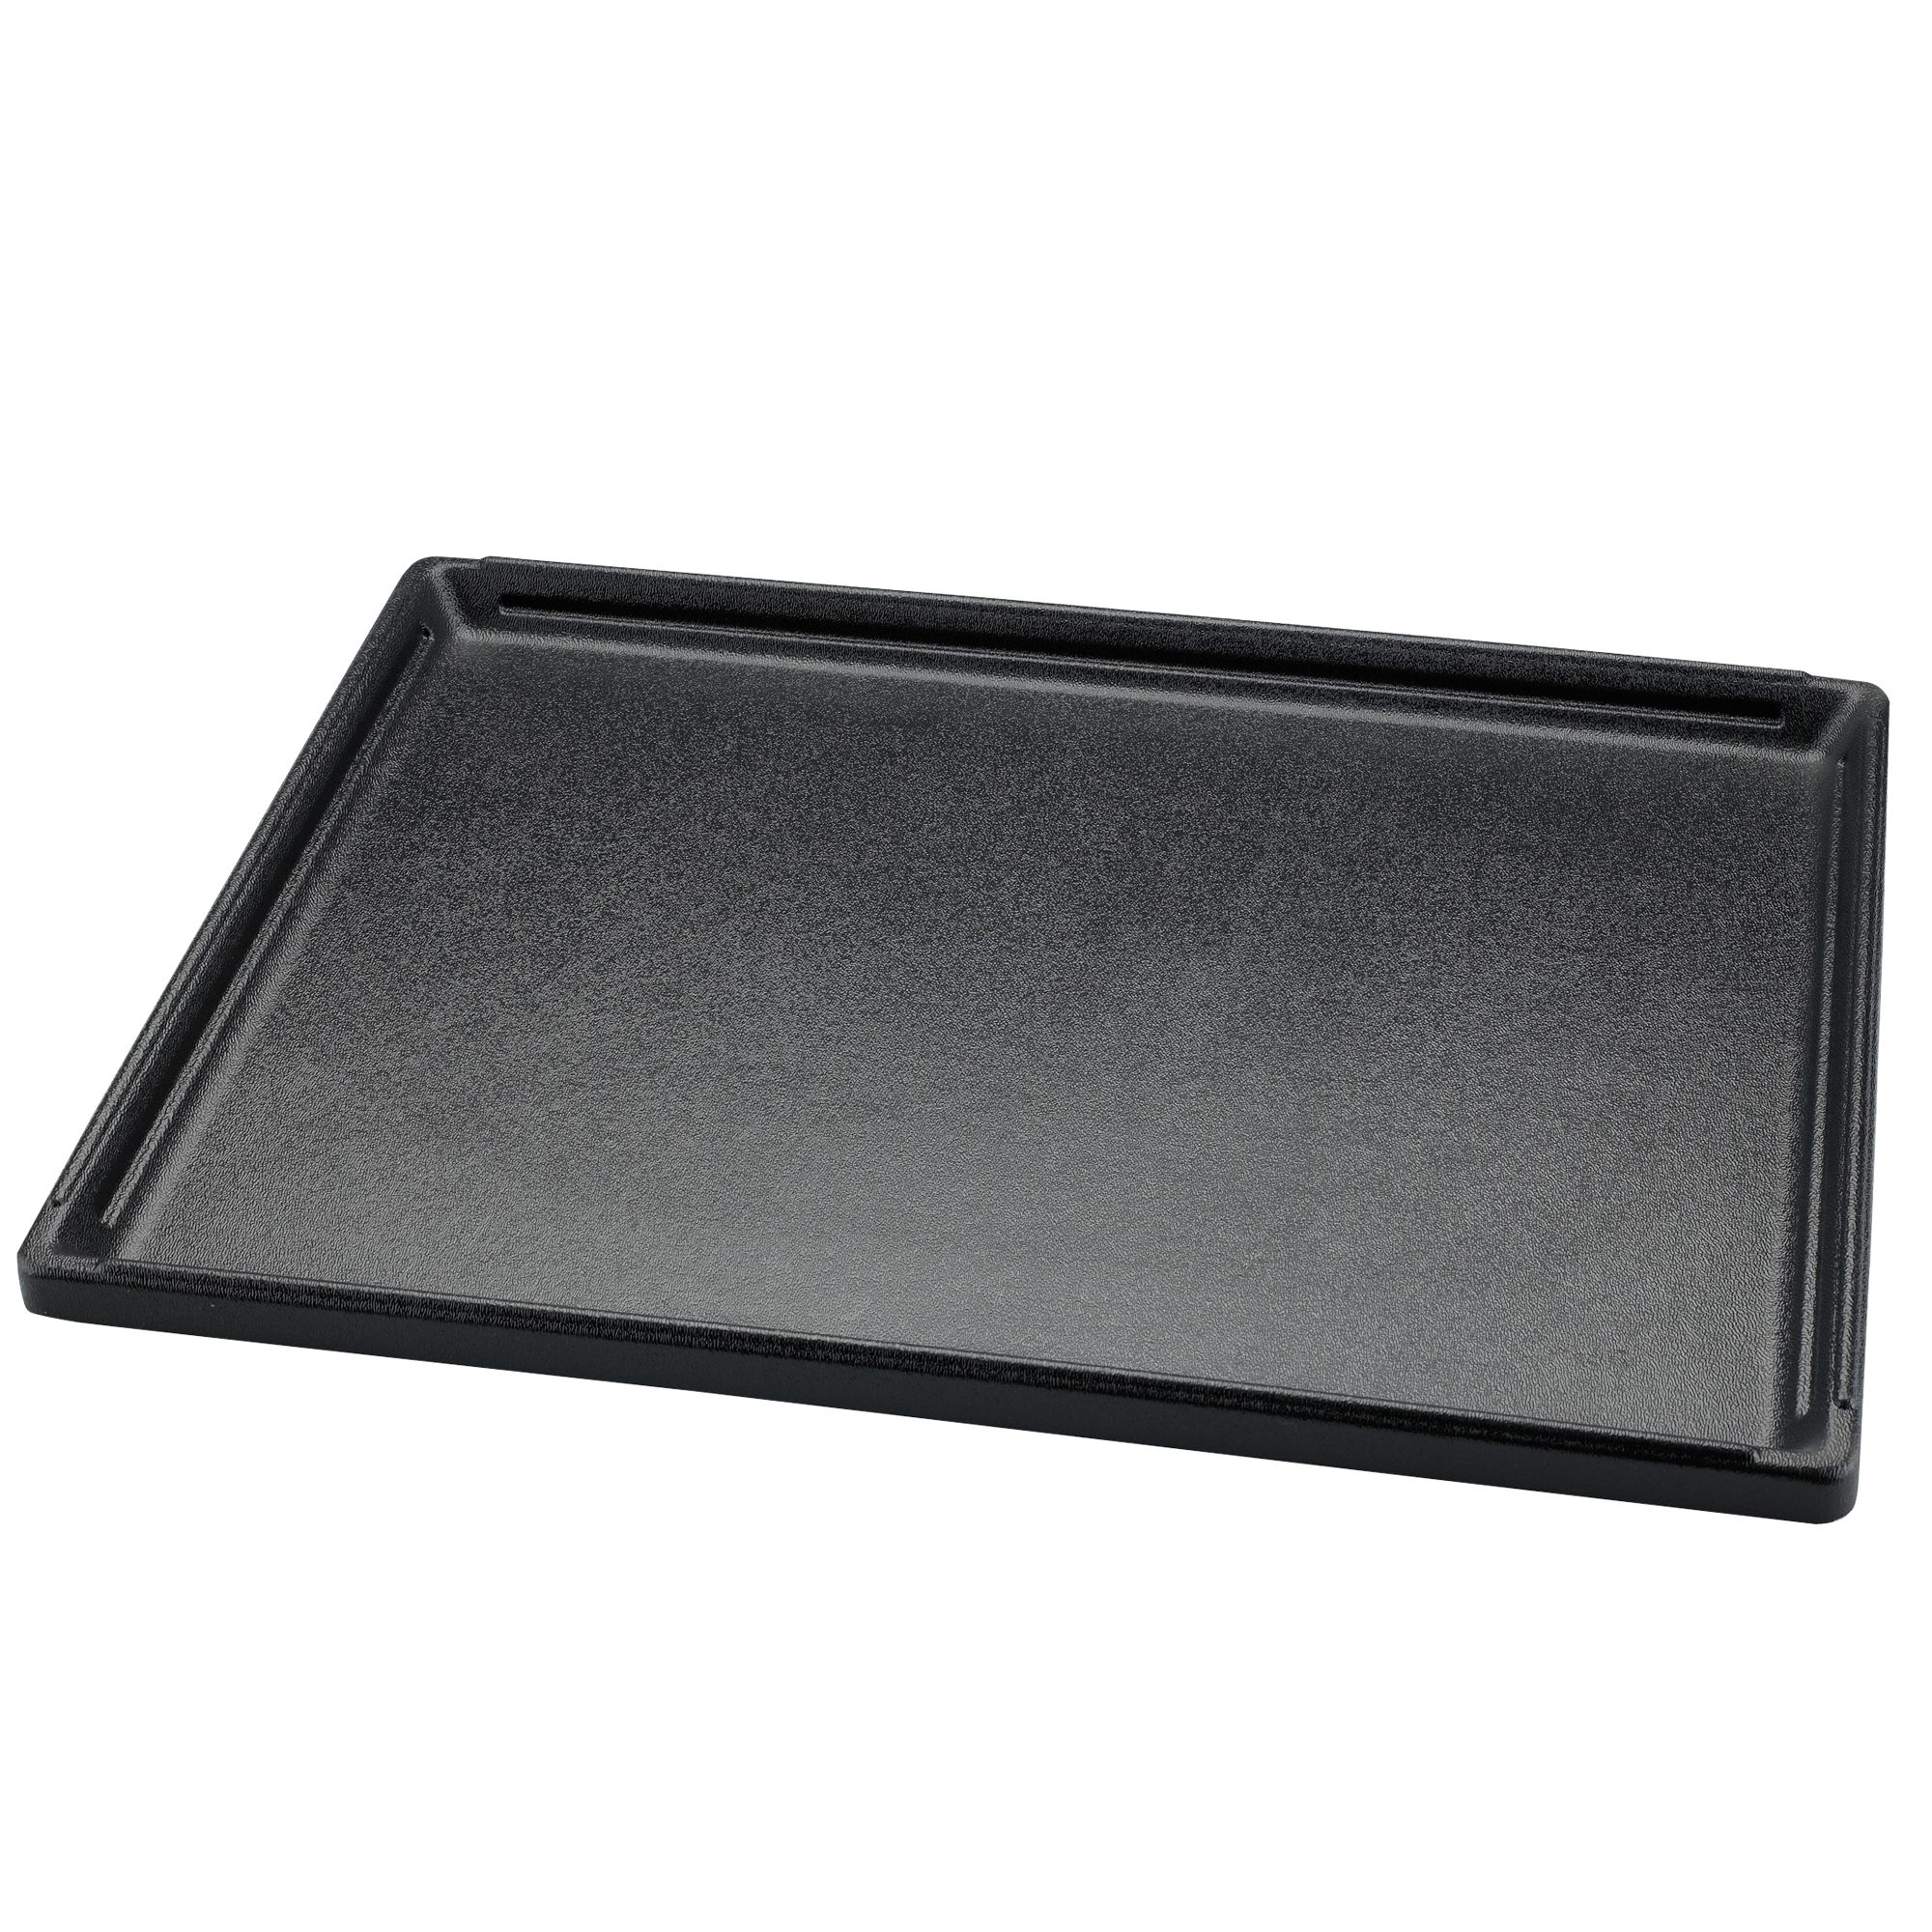 MidWest Crate Replacement Pan | dog Mat 